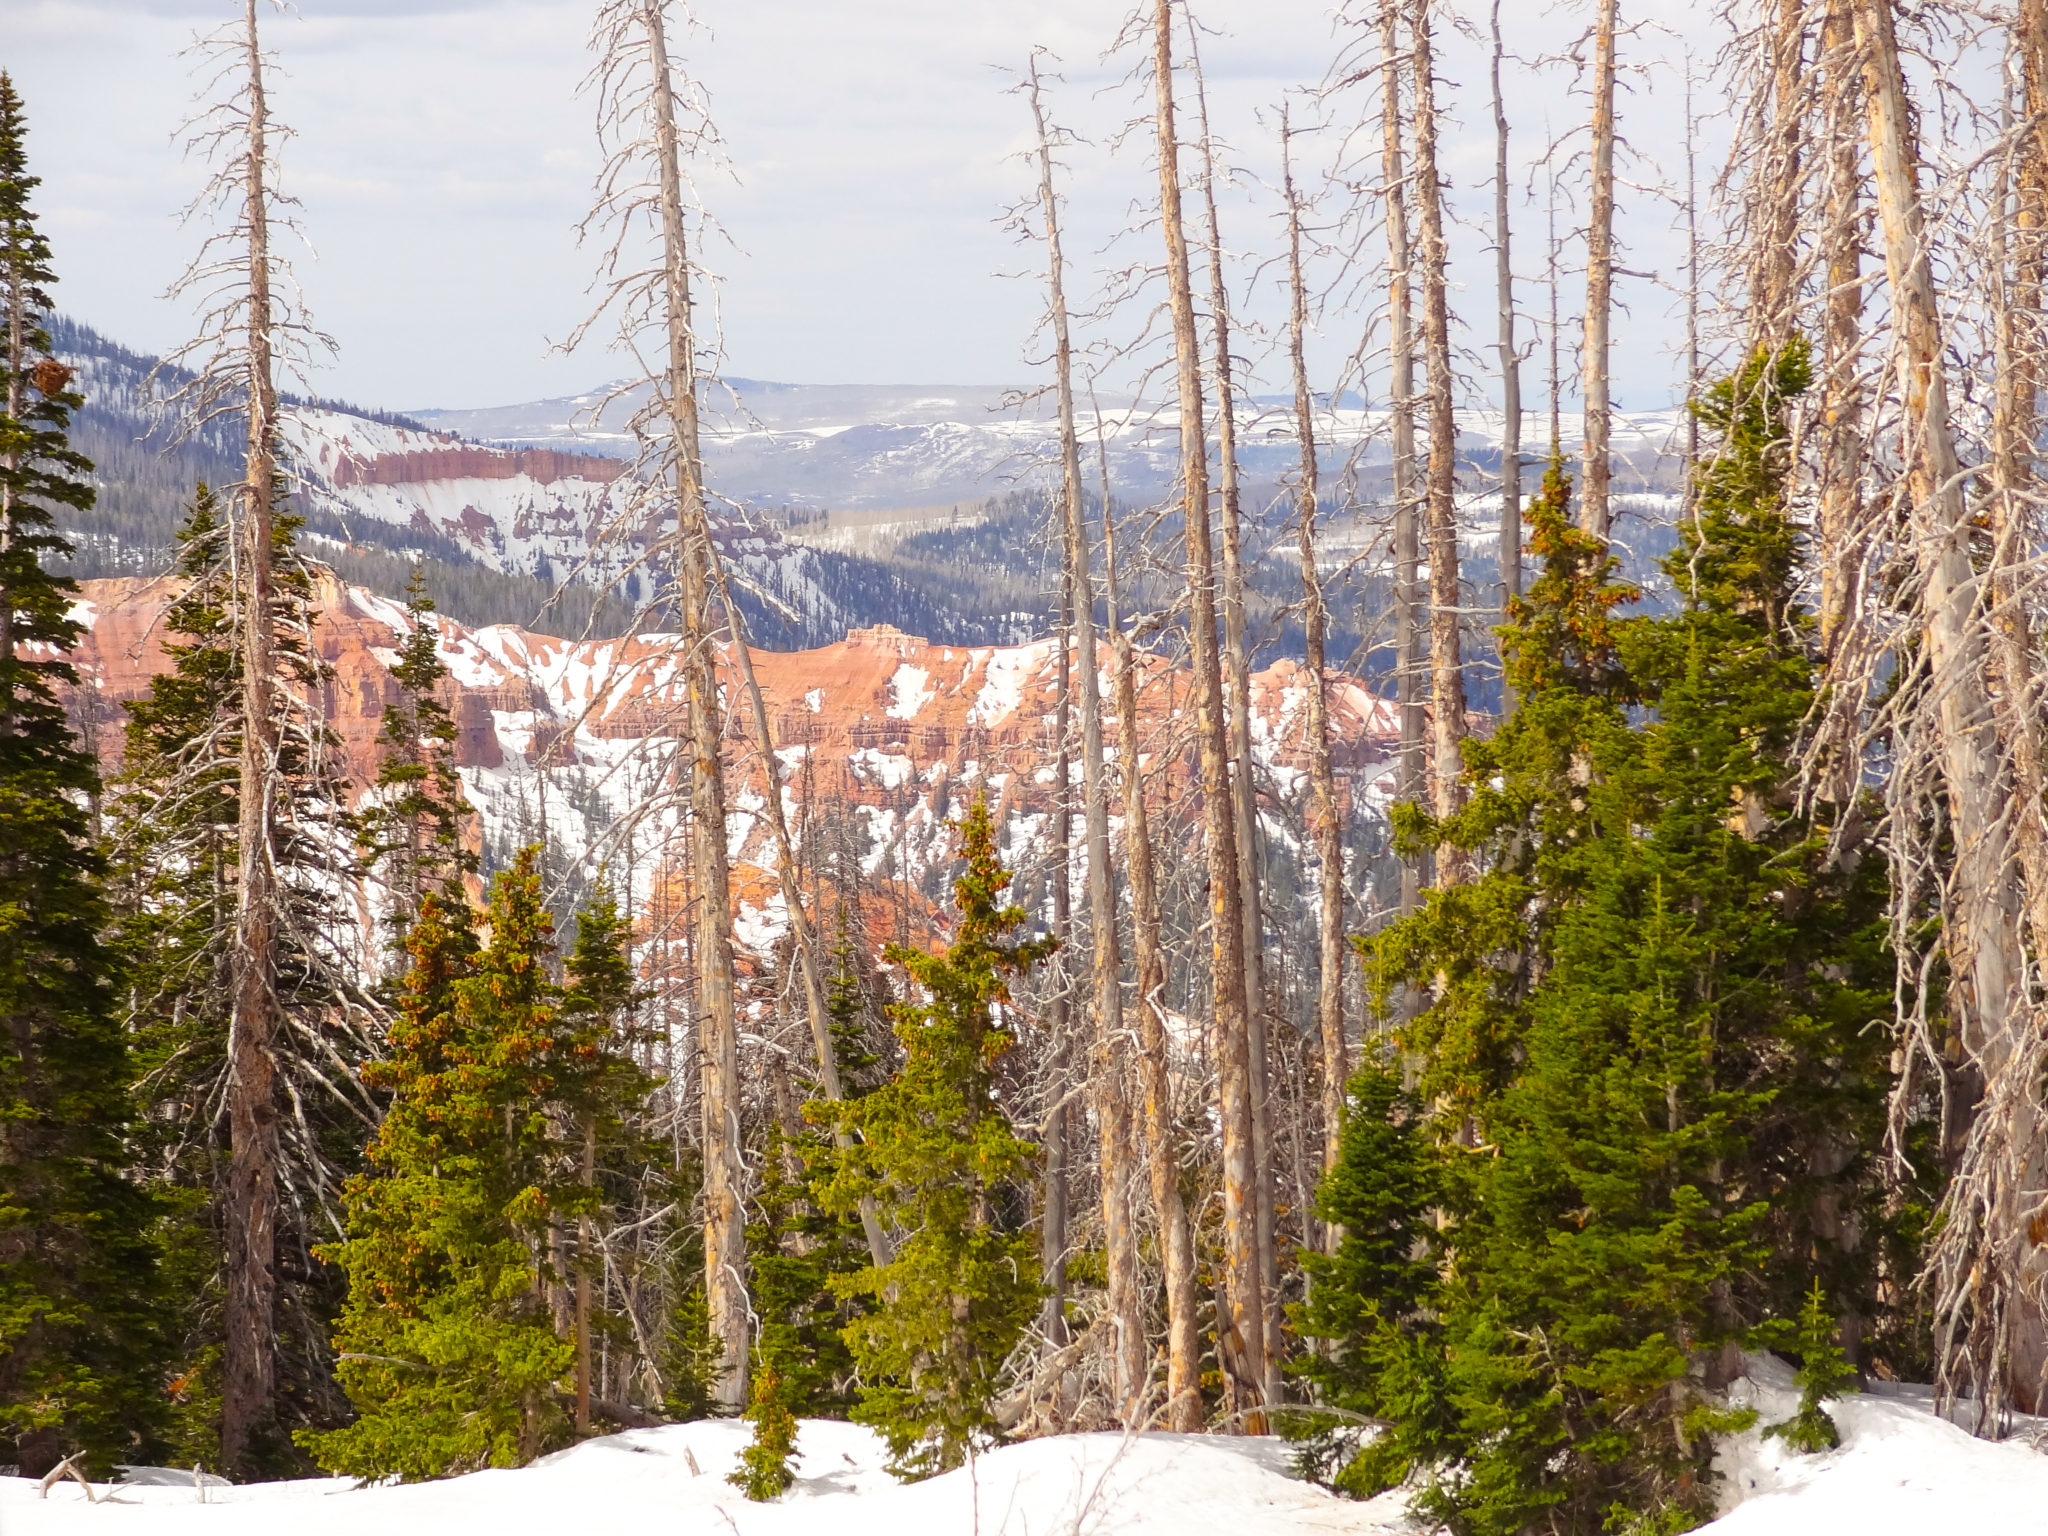 Cedar Breaks National Monument is a beautiful park to see hoodoos. It is less well-known than its companion, Bryce Canyon, but boasts beautiful views. Be prepared for snowy conditions, however, that may linger well into May. This is a story of getting stuck in this beautiful monument - shared so you can avoid a similar experience. Happy Exploring! #parktripsandmore #cedarbreaks #findyourpark #utah #roadtrip #nationalparks